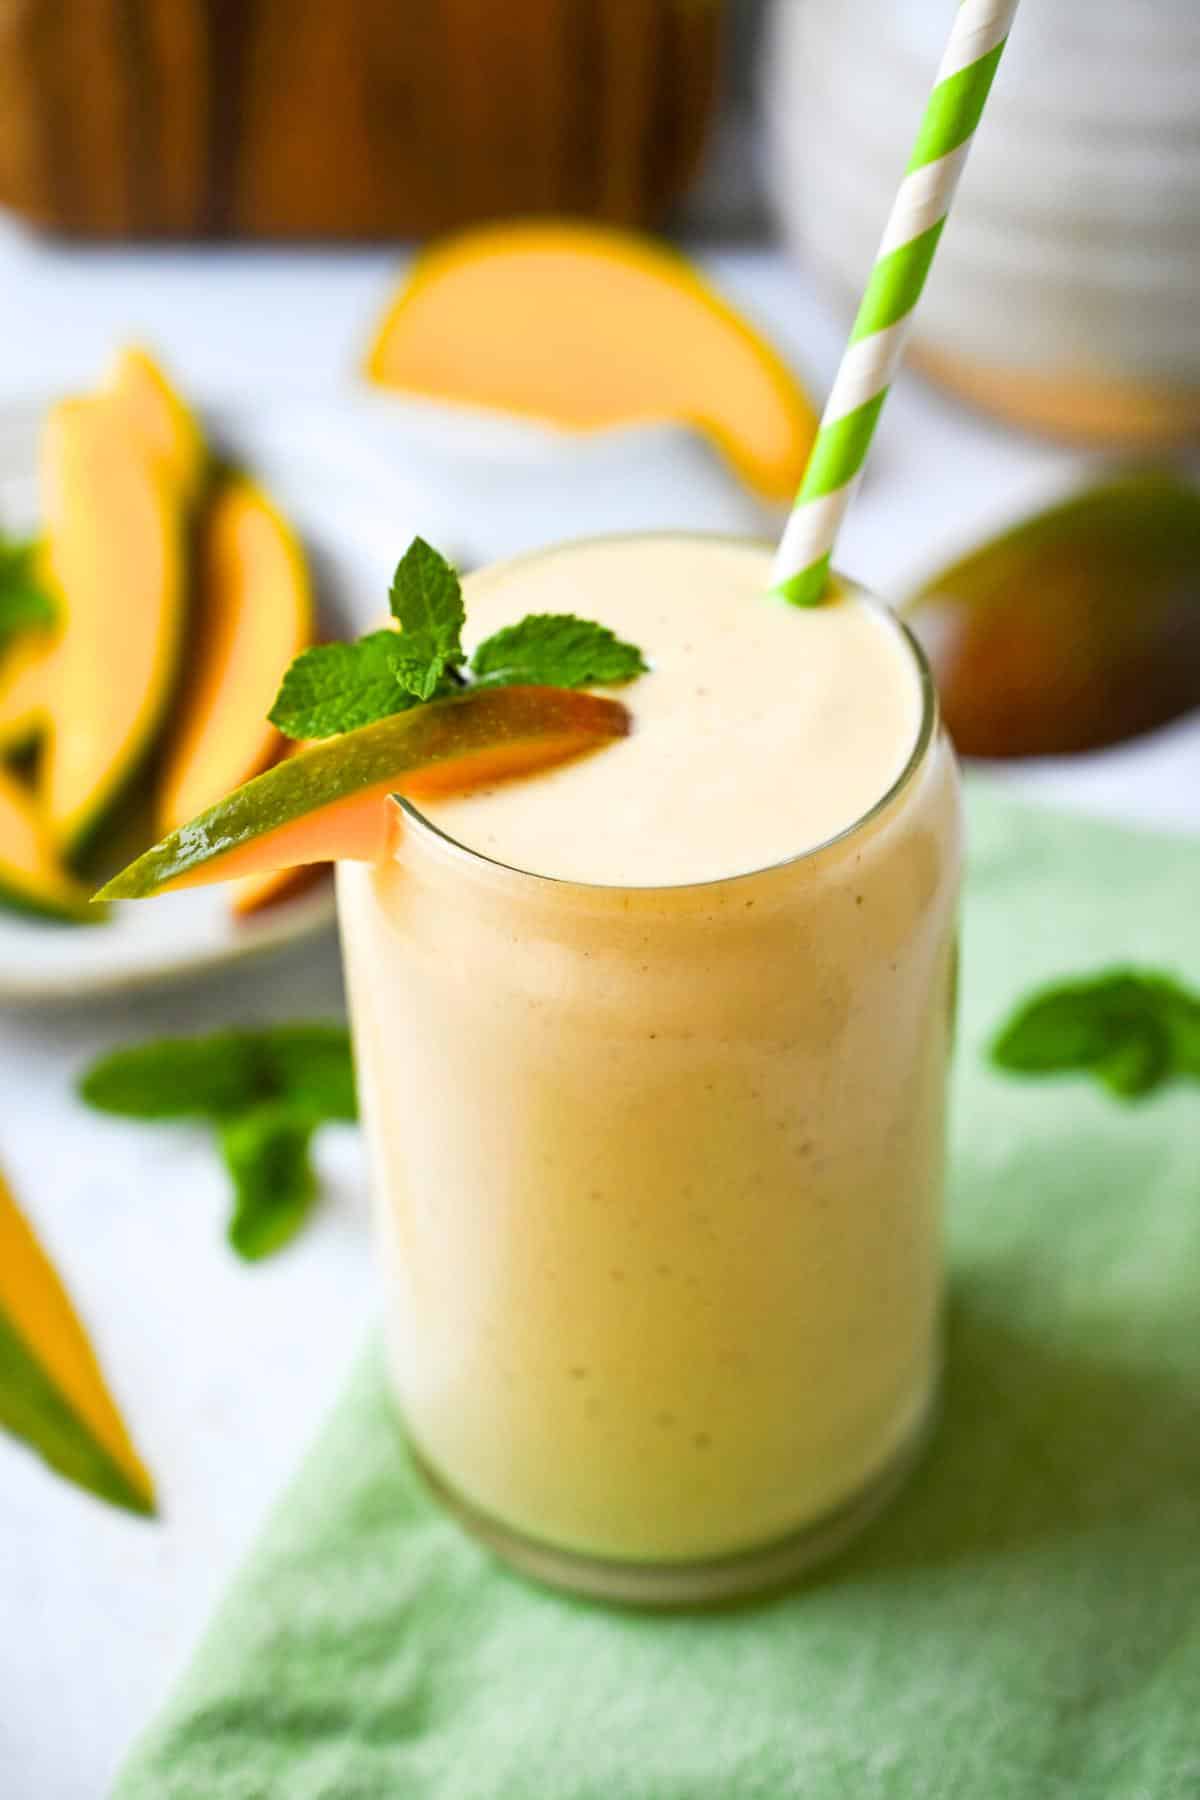 a mango smoothie in a glass with a green striped straw with a cutting board and mango slices